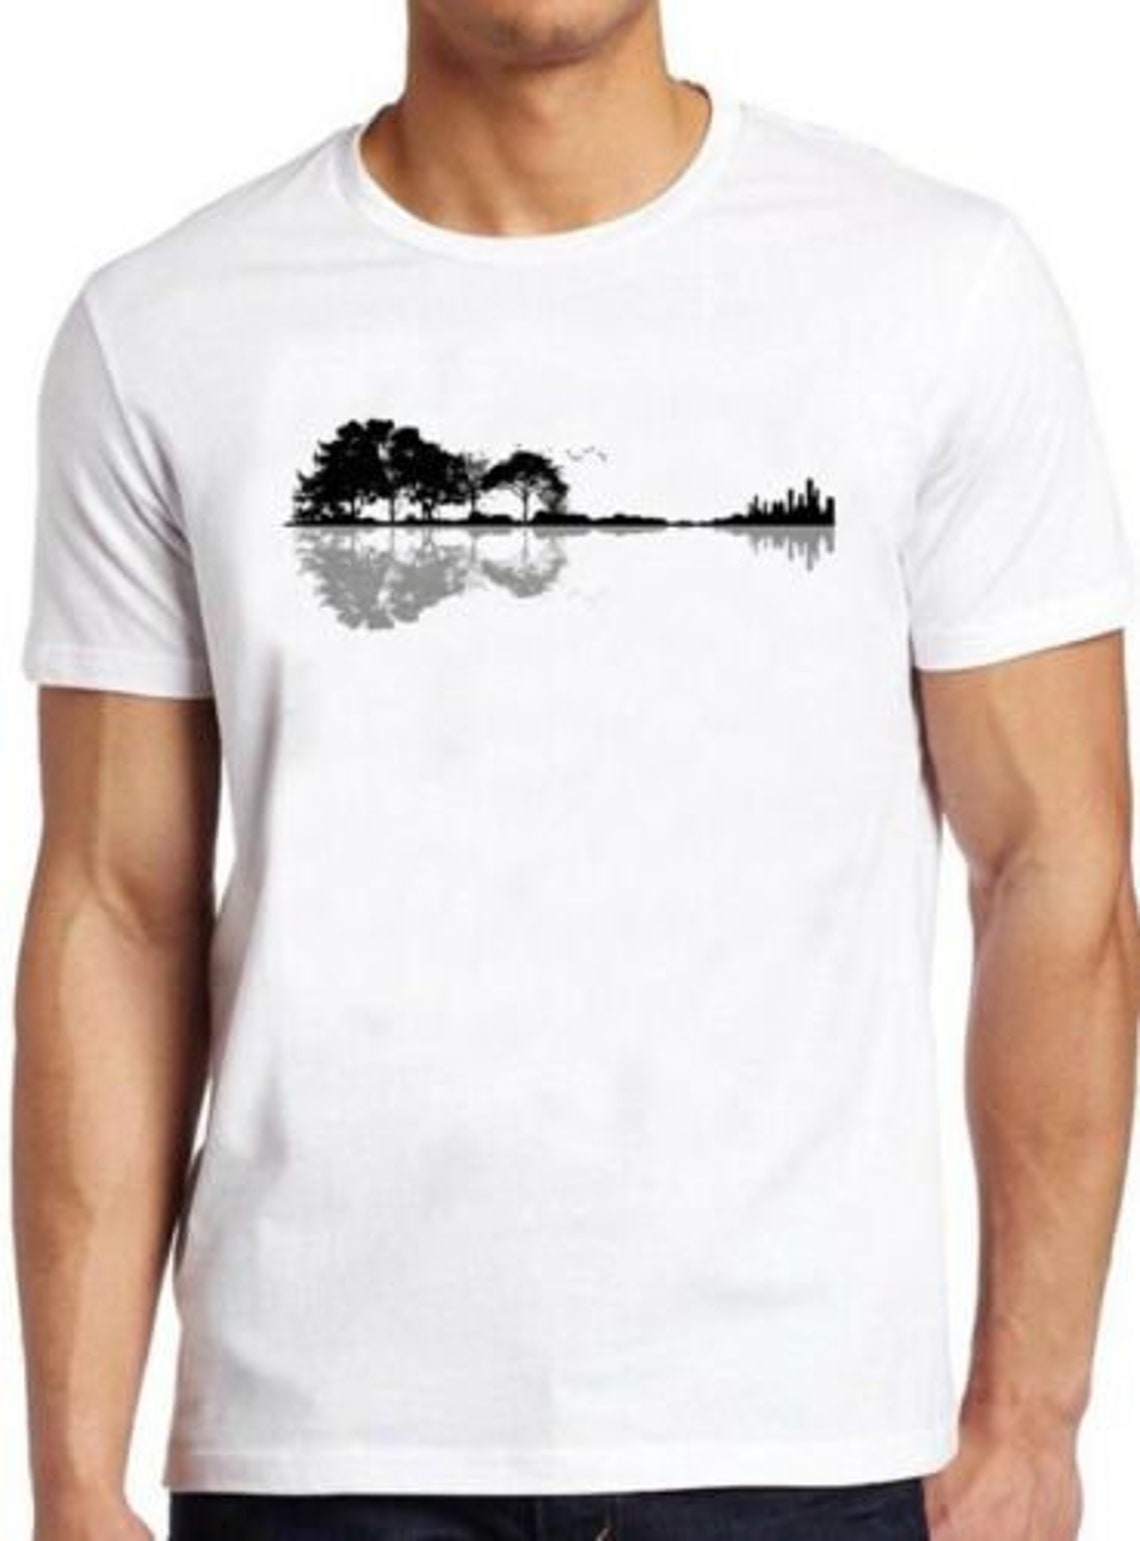 Guitar Tree T Shirt Nature Forest Climate Change